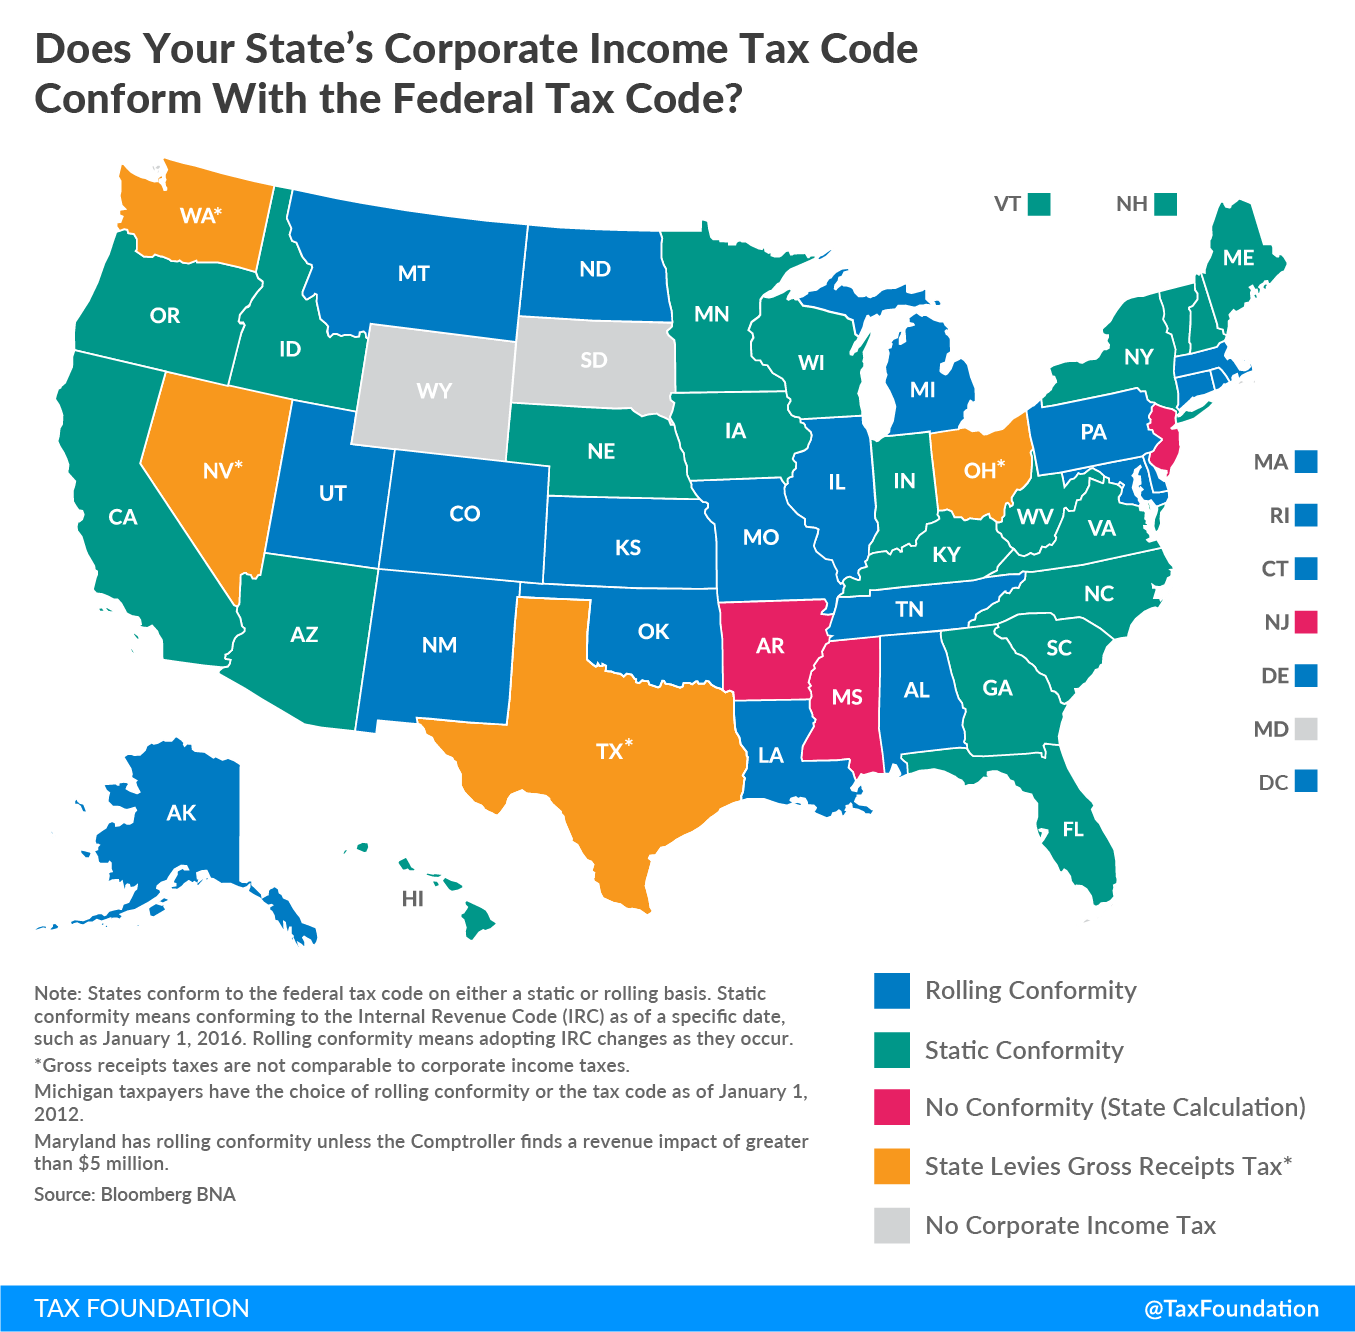 Does Your State’s Corporate Income Tax Code Conform with the Federal Tax Code? 